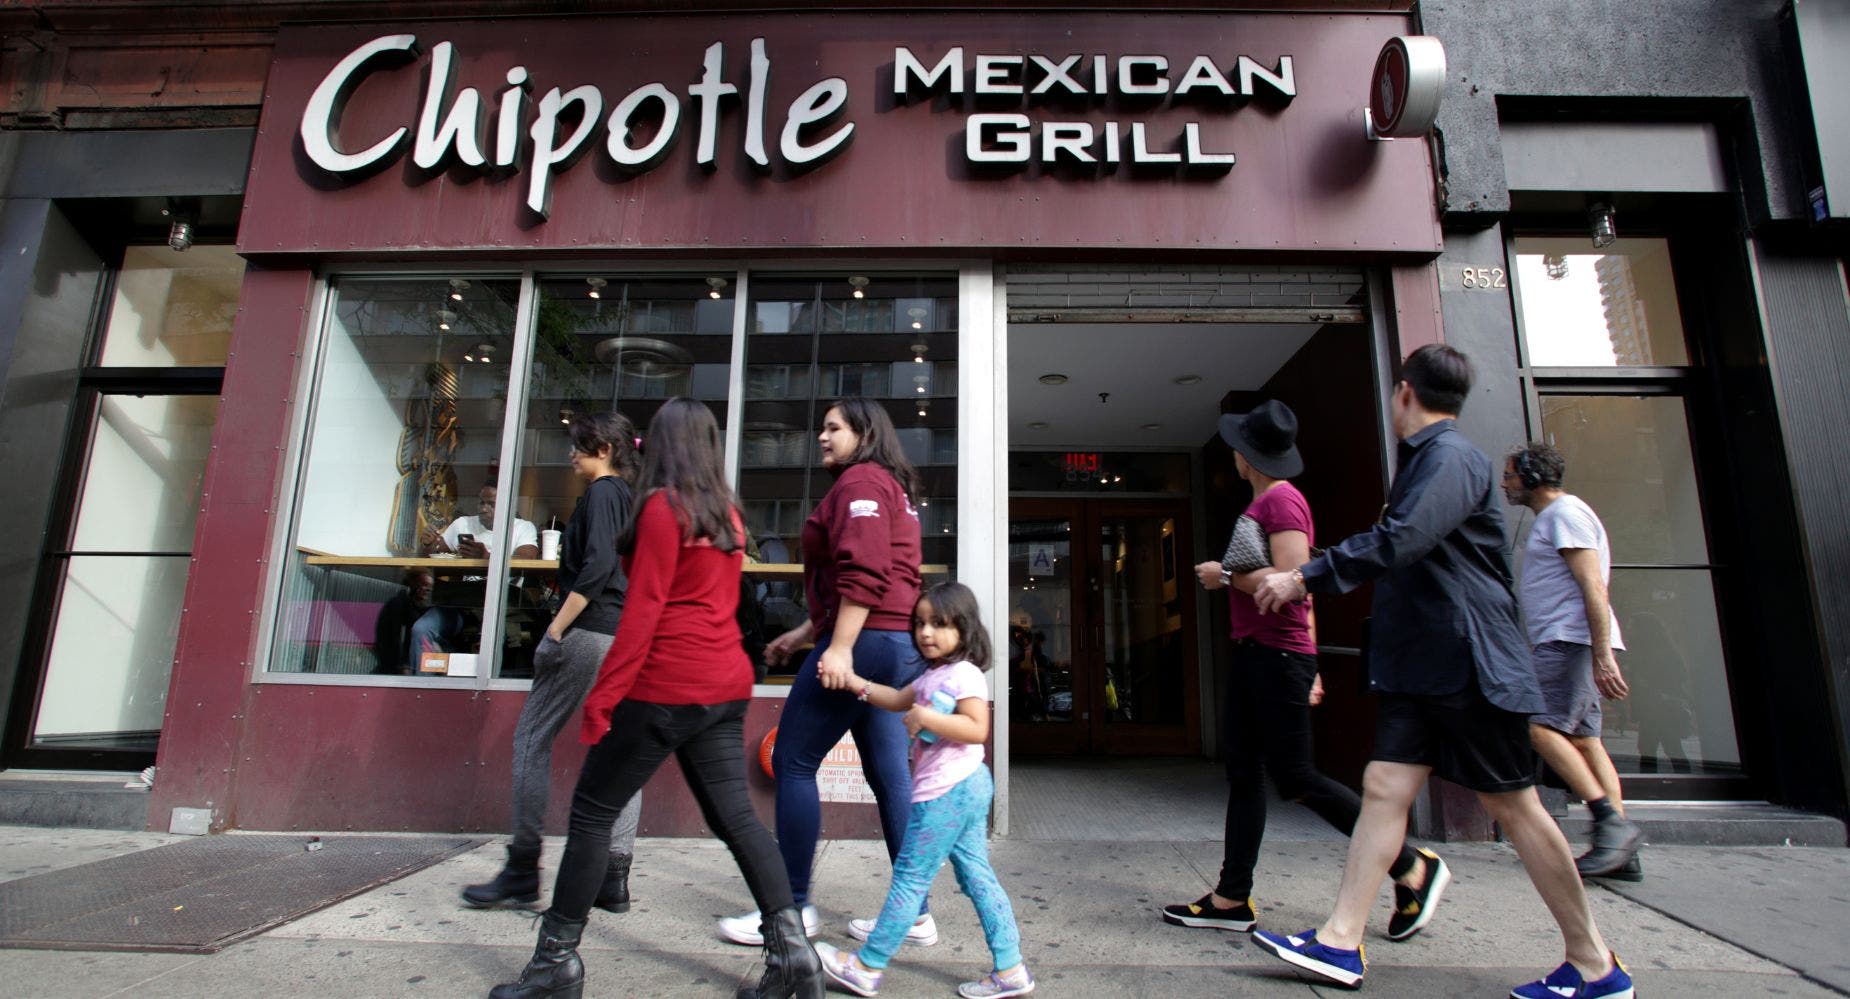 Chipotle Pivots To Attract High-Income Consumers, But What About Lower-Income Customers?